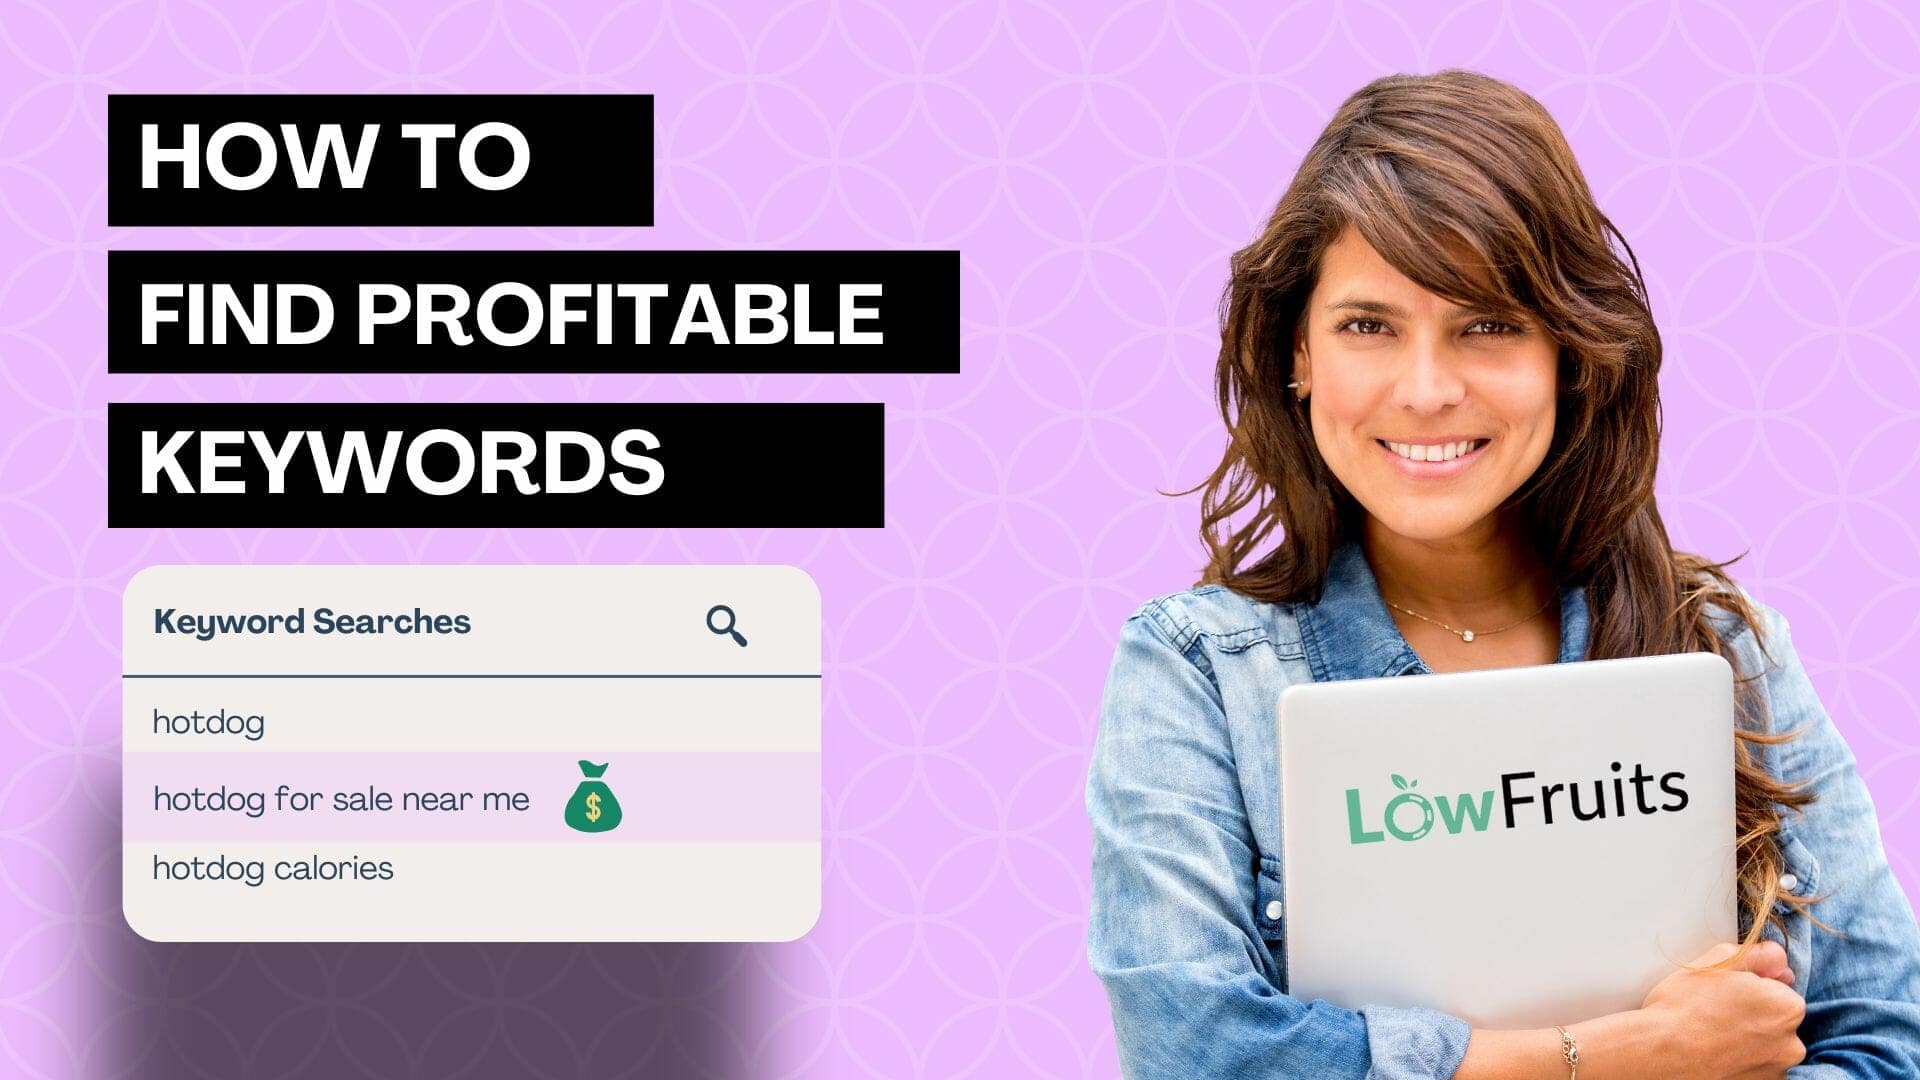 How to find profitable keywords.